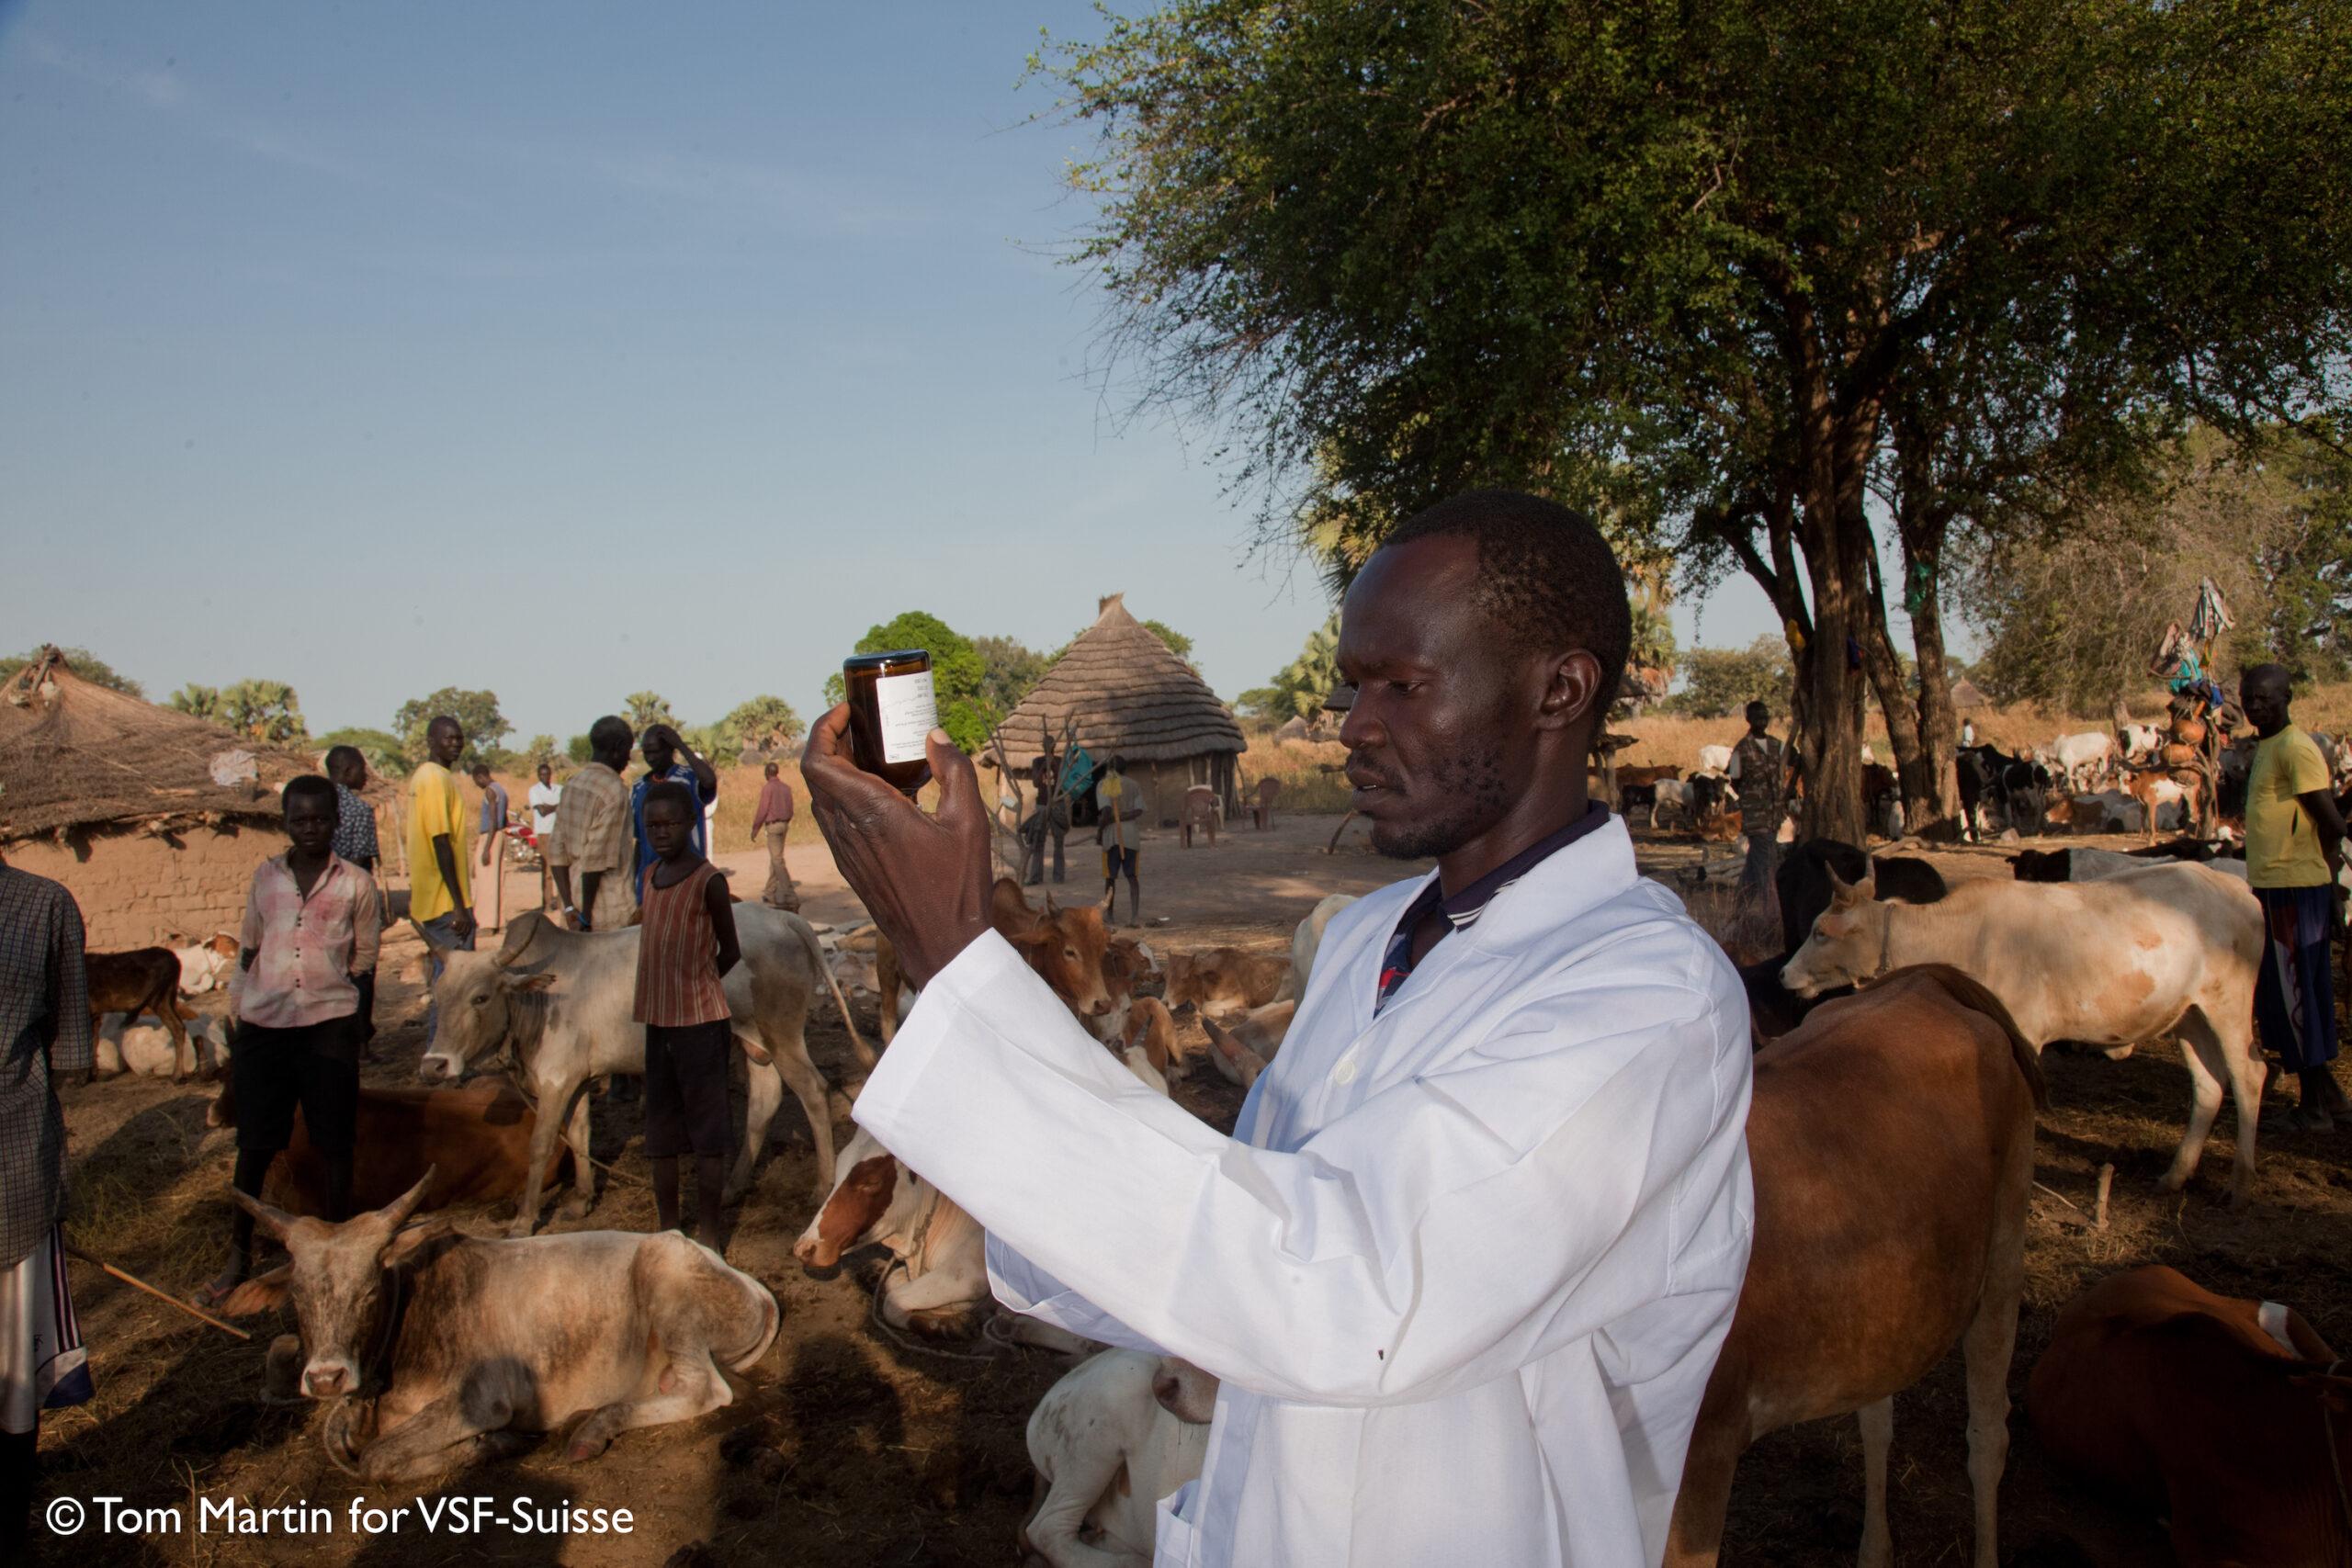 Community animal health workers treat animals at a Cattle camp, Northern Bahr el Ghazal, South Sudan.